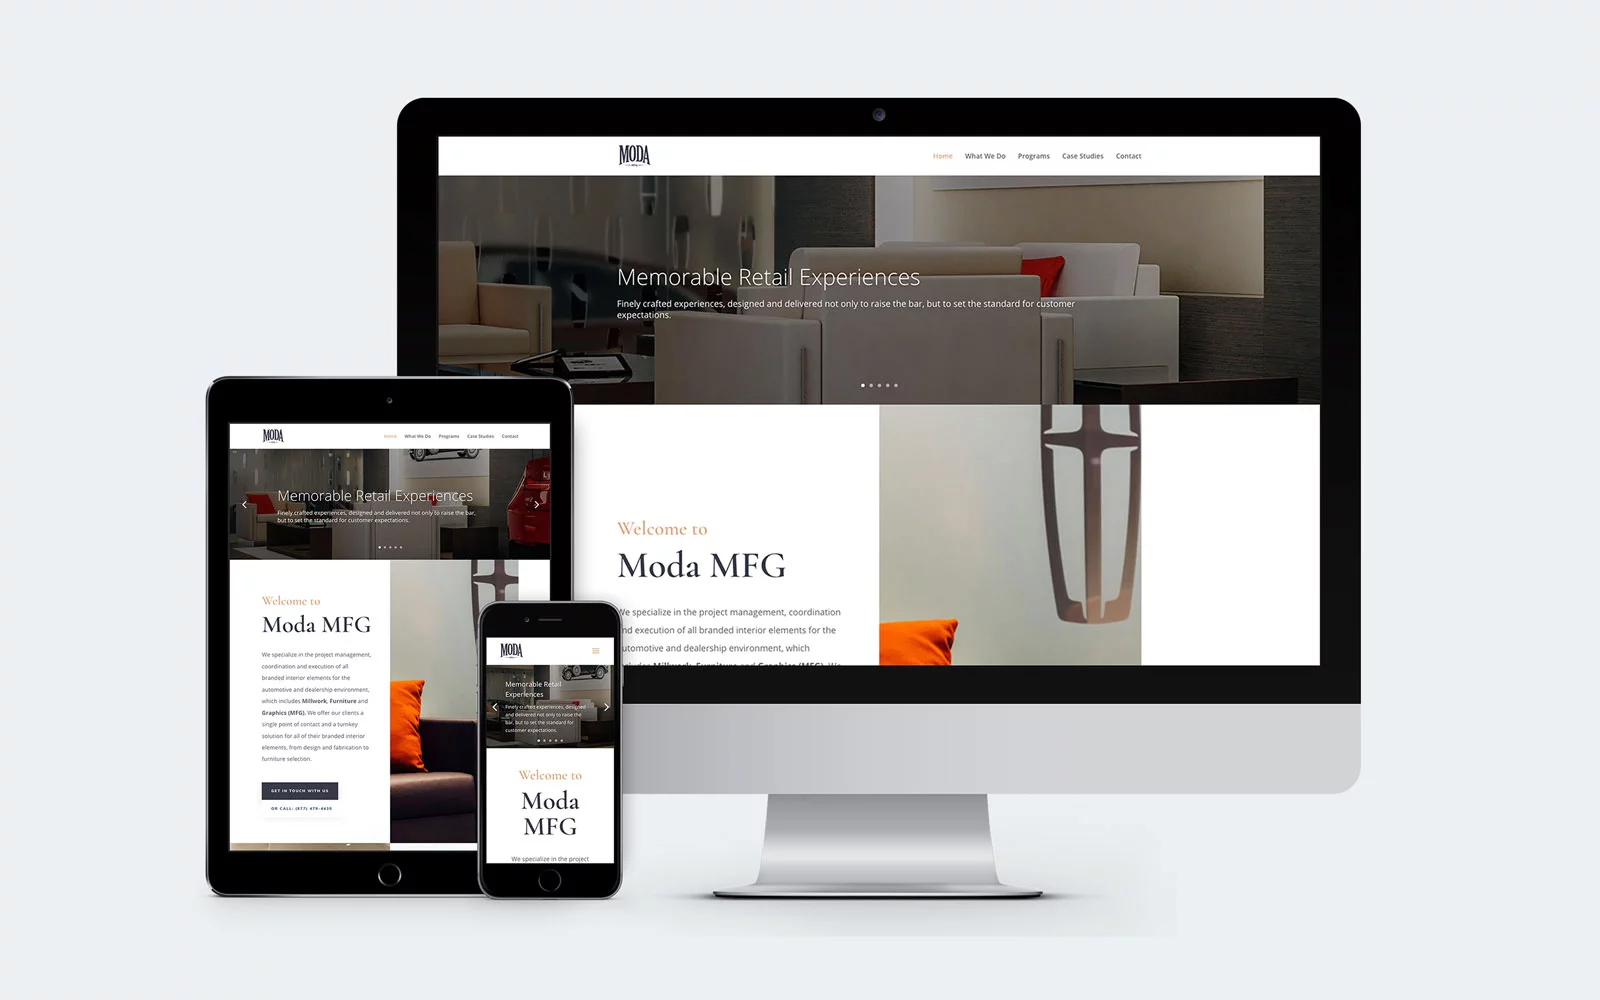 MFG Interiors (Formerly Moda MFG) Website - Device collage showing desktop, tablet and mobile